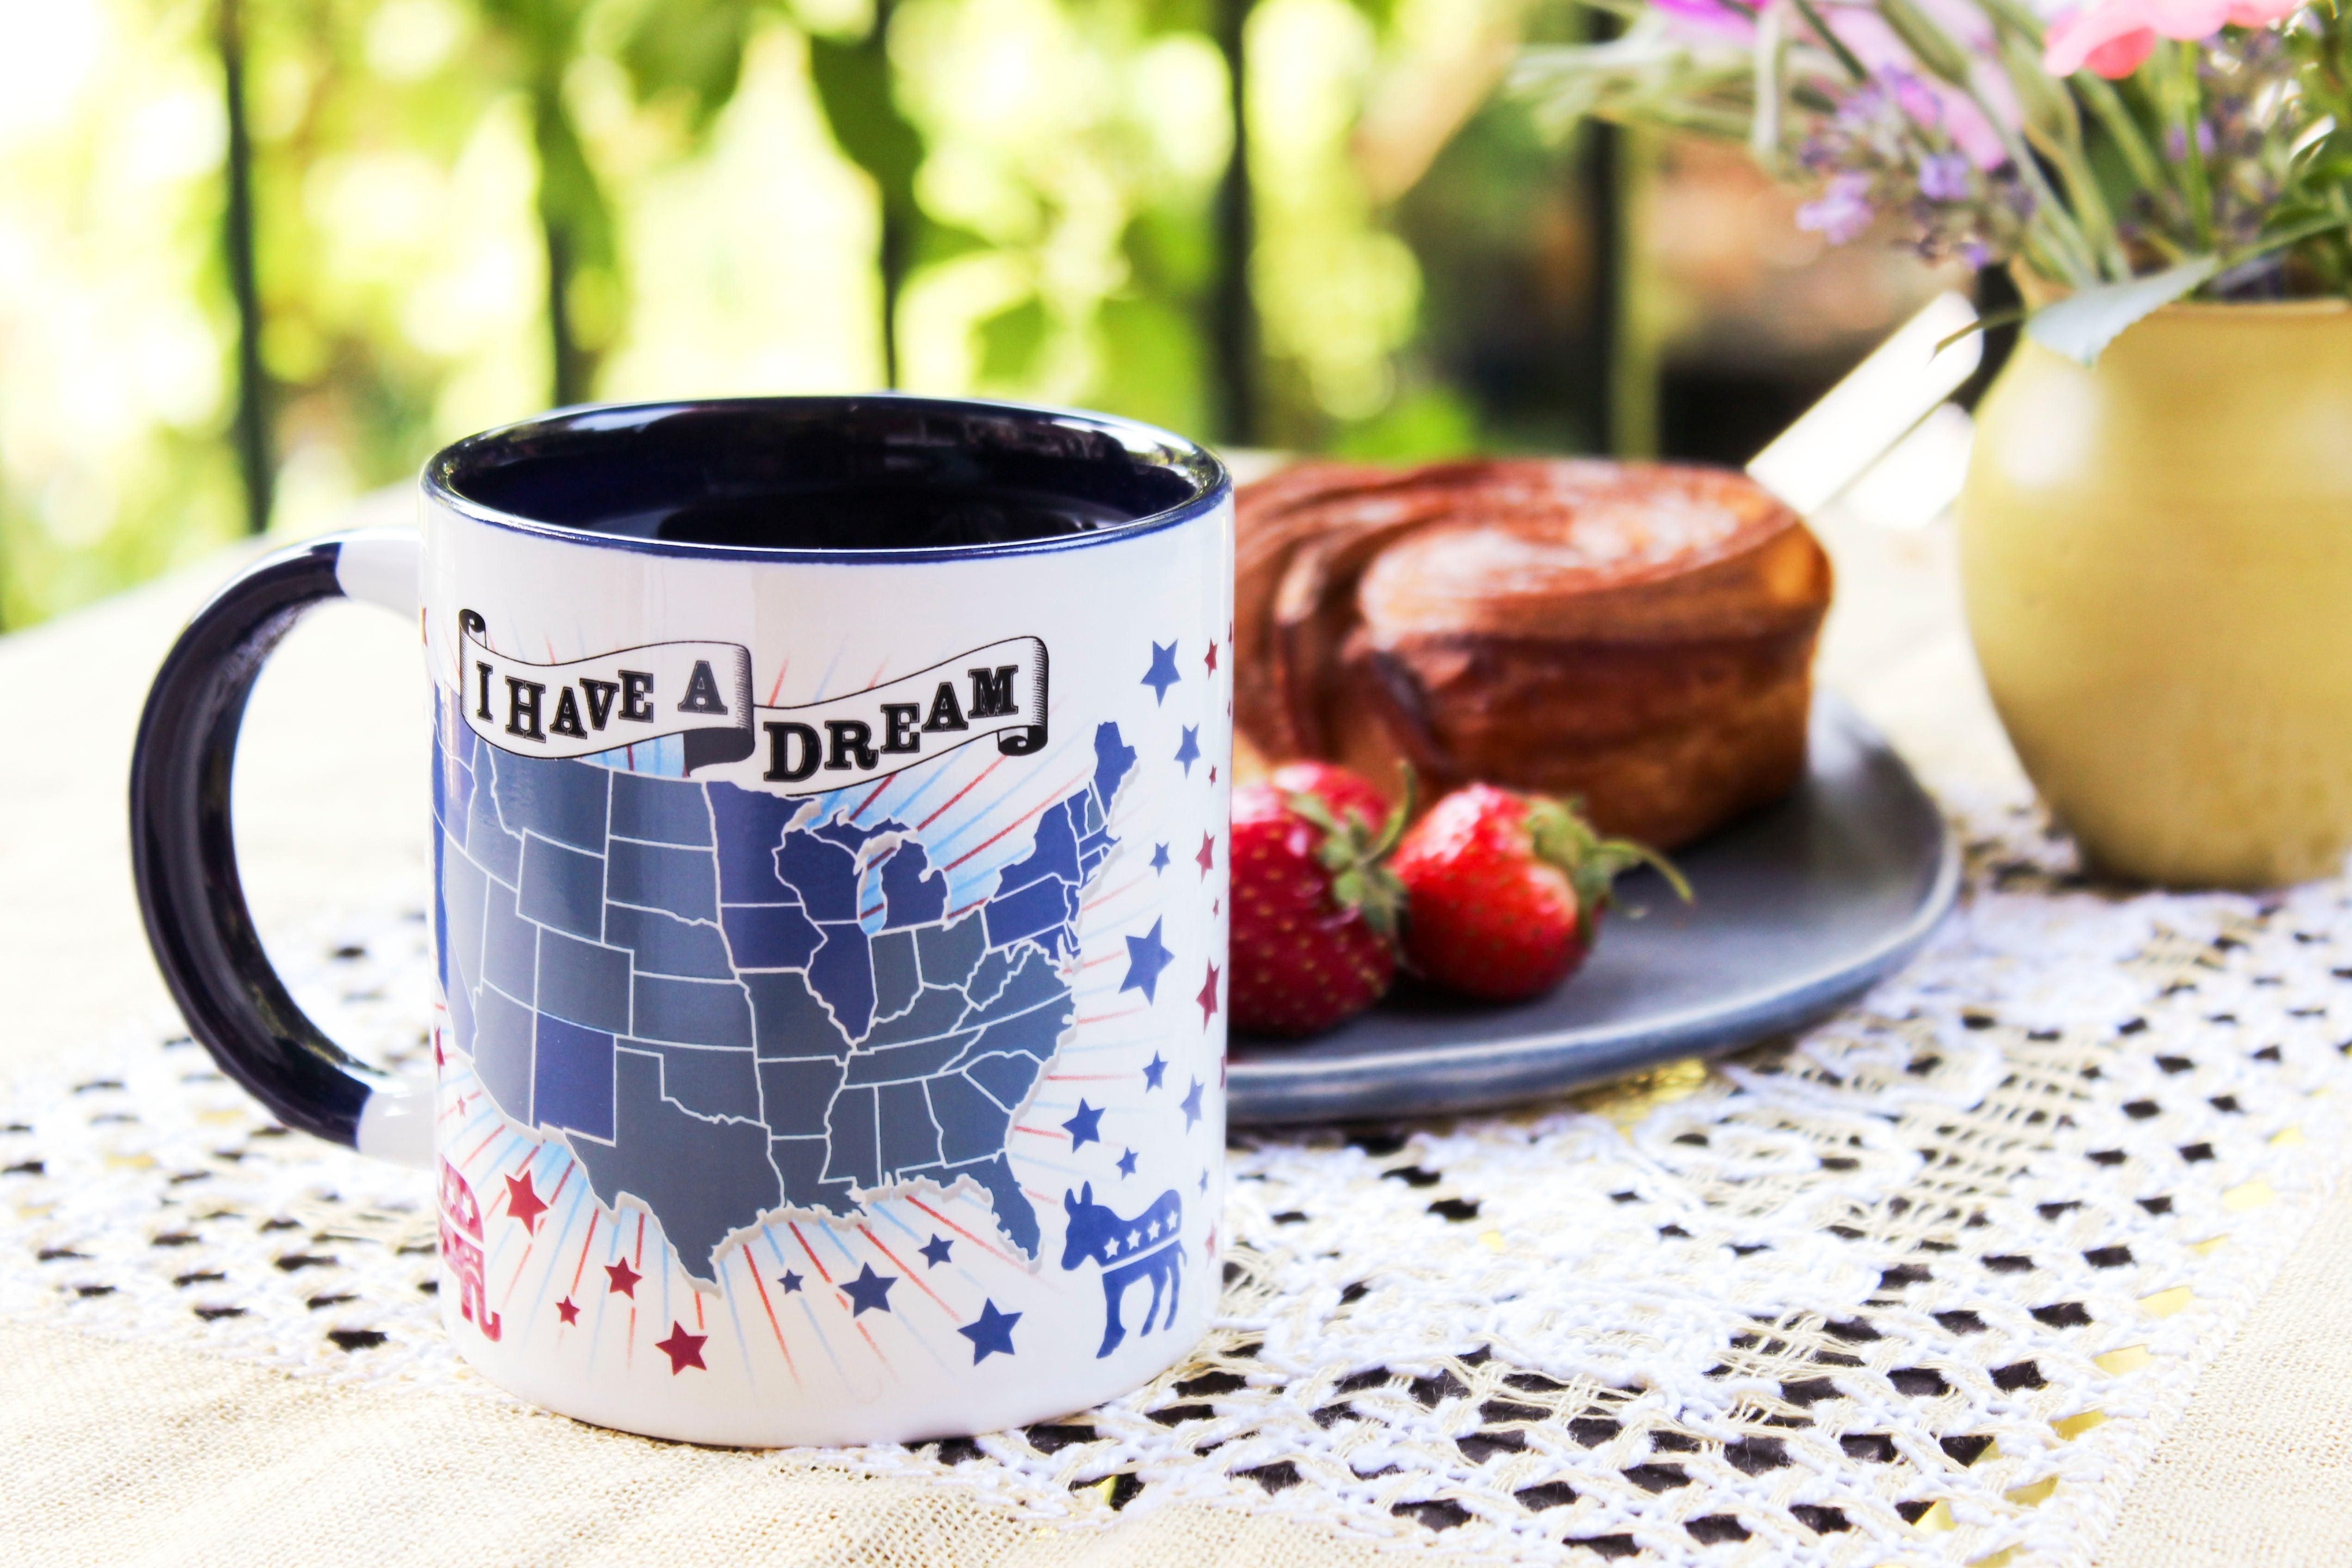 Star Trek Transporter Heat-Changing Mug  Smart and Funny Gifts by UPG –  The Unemployed Philosophers Guild